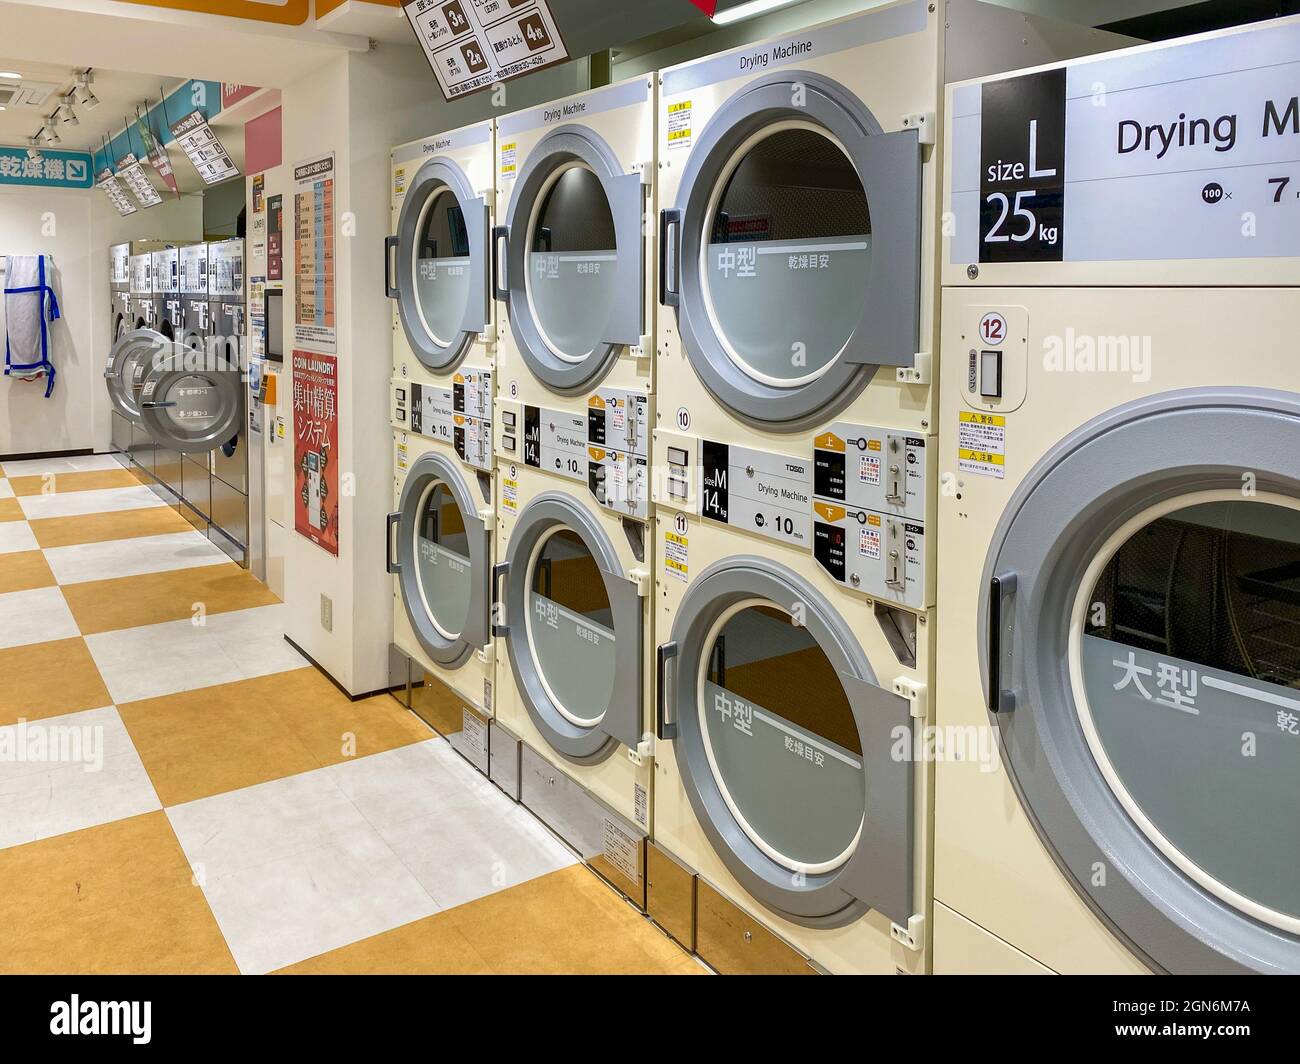 Tokyo, Japan - 23 November 2019: Local laundromat used for public use to wash laundry in Tokyo, Japan Stock Photo